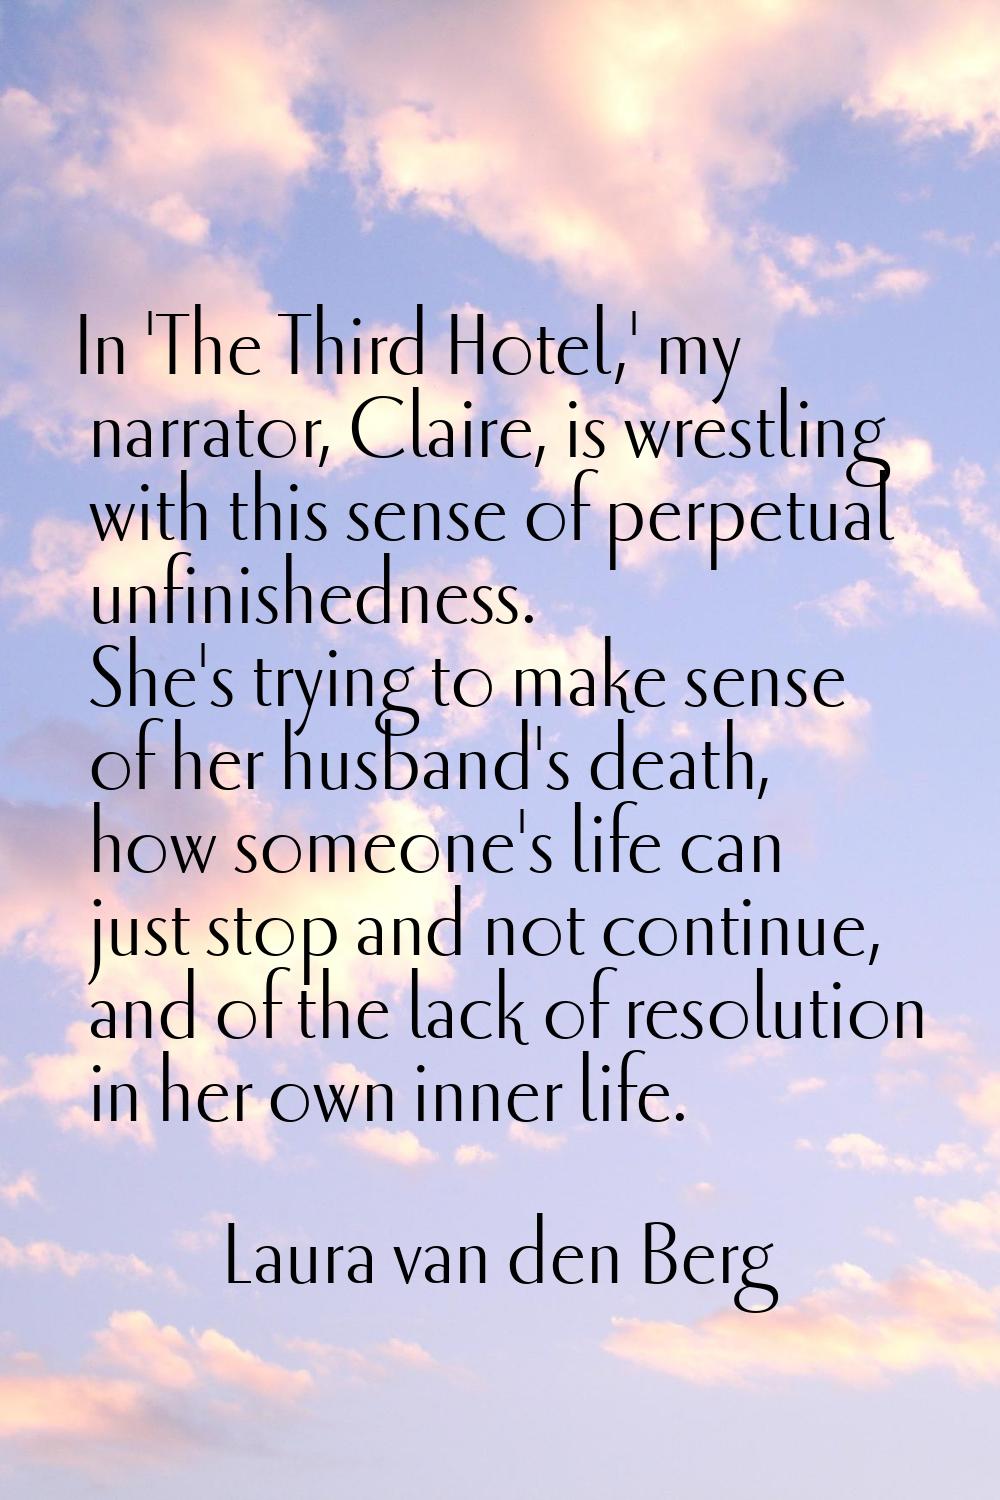 In 'The Third Hotel,' my narrator, Claire, is wrestling with this sense of perpetual unfinishedness